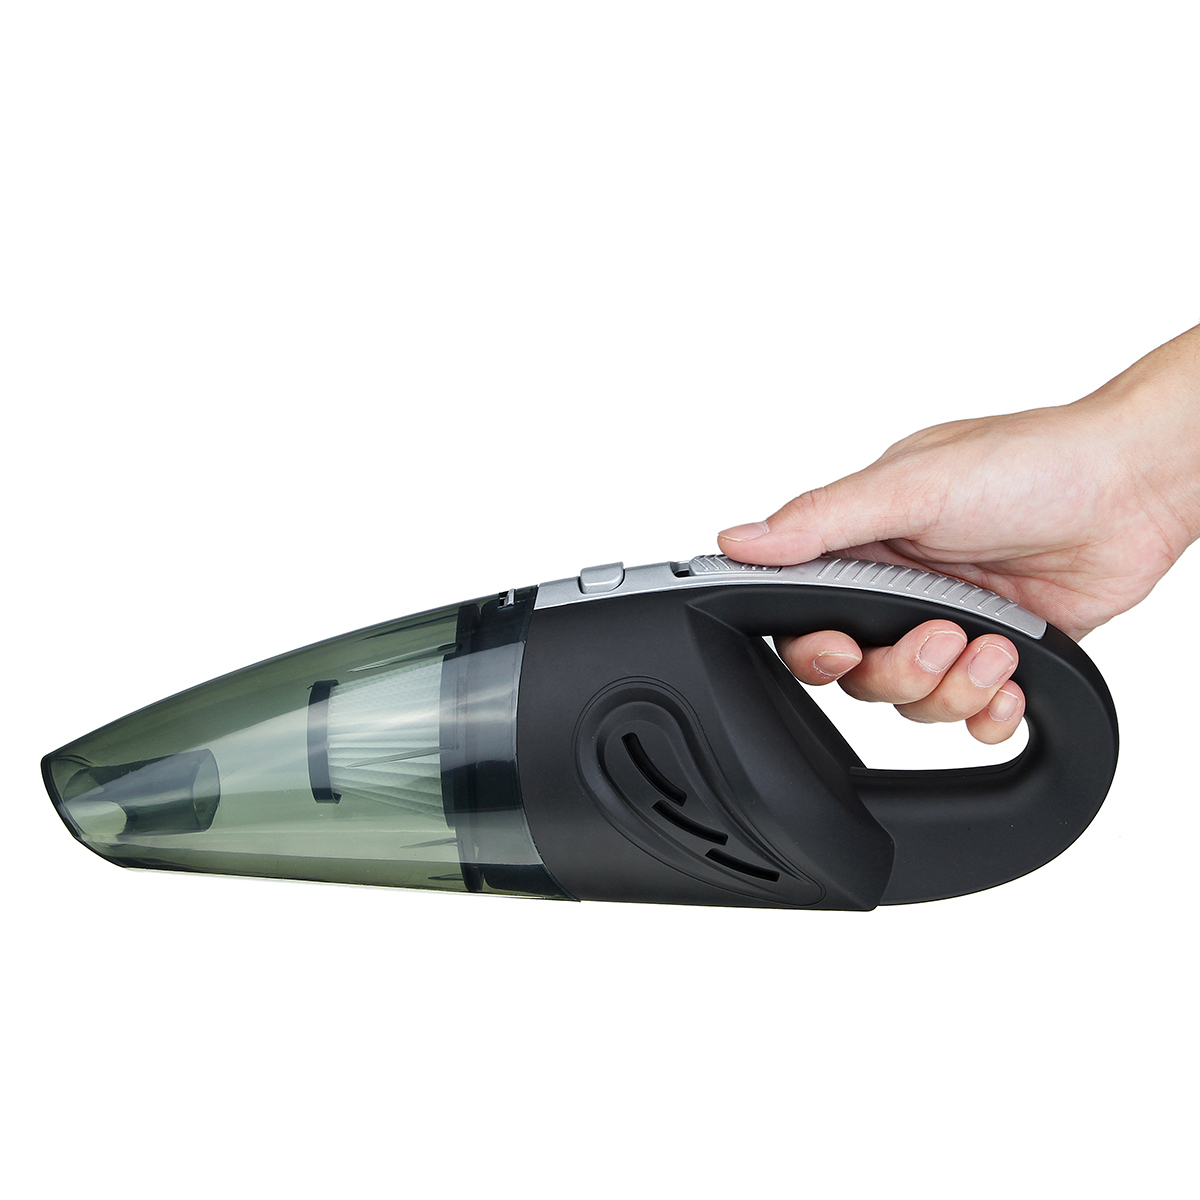 

120W USB Vacuum Cleaner Rechargeable Wet +Dry Portable Cordless Car Home Handheld Cleaning Equipment